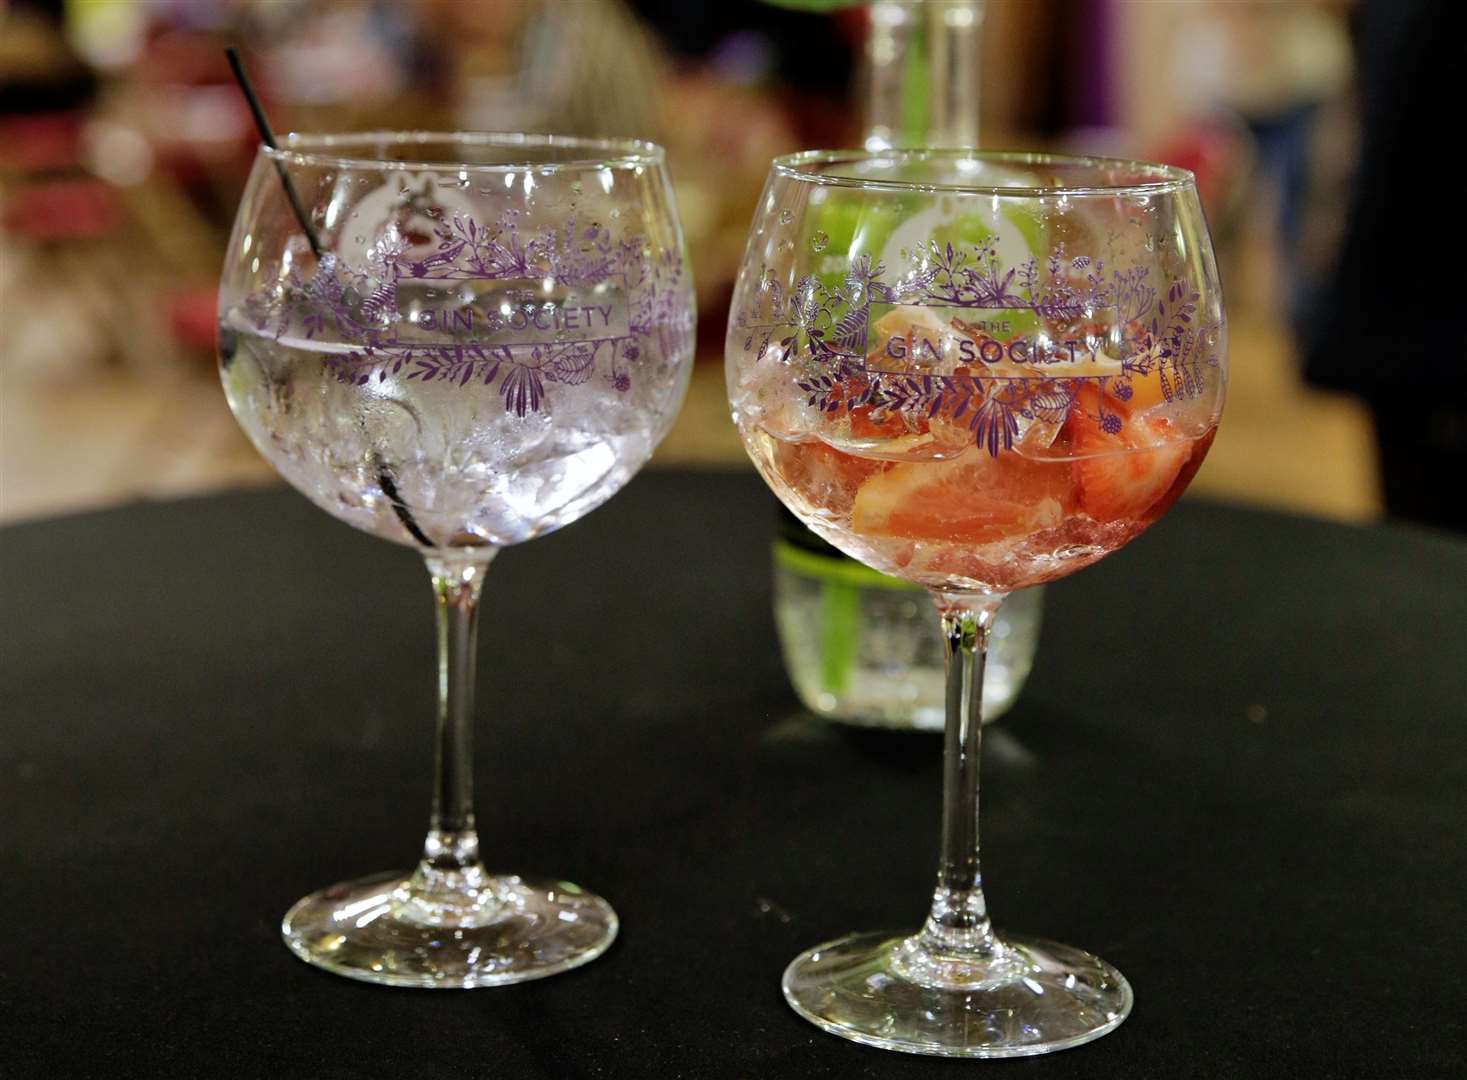 The Gin Society is returning to Canterbury